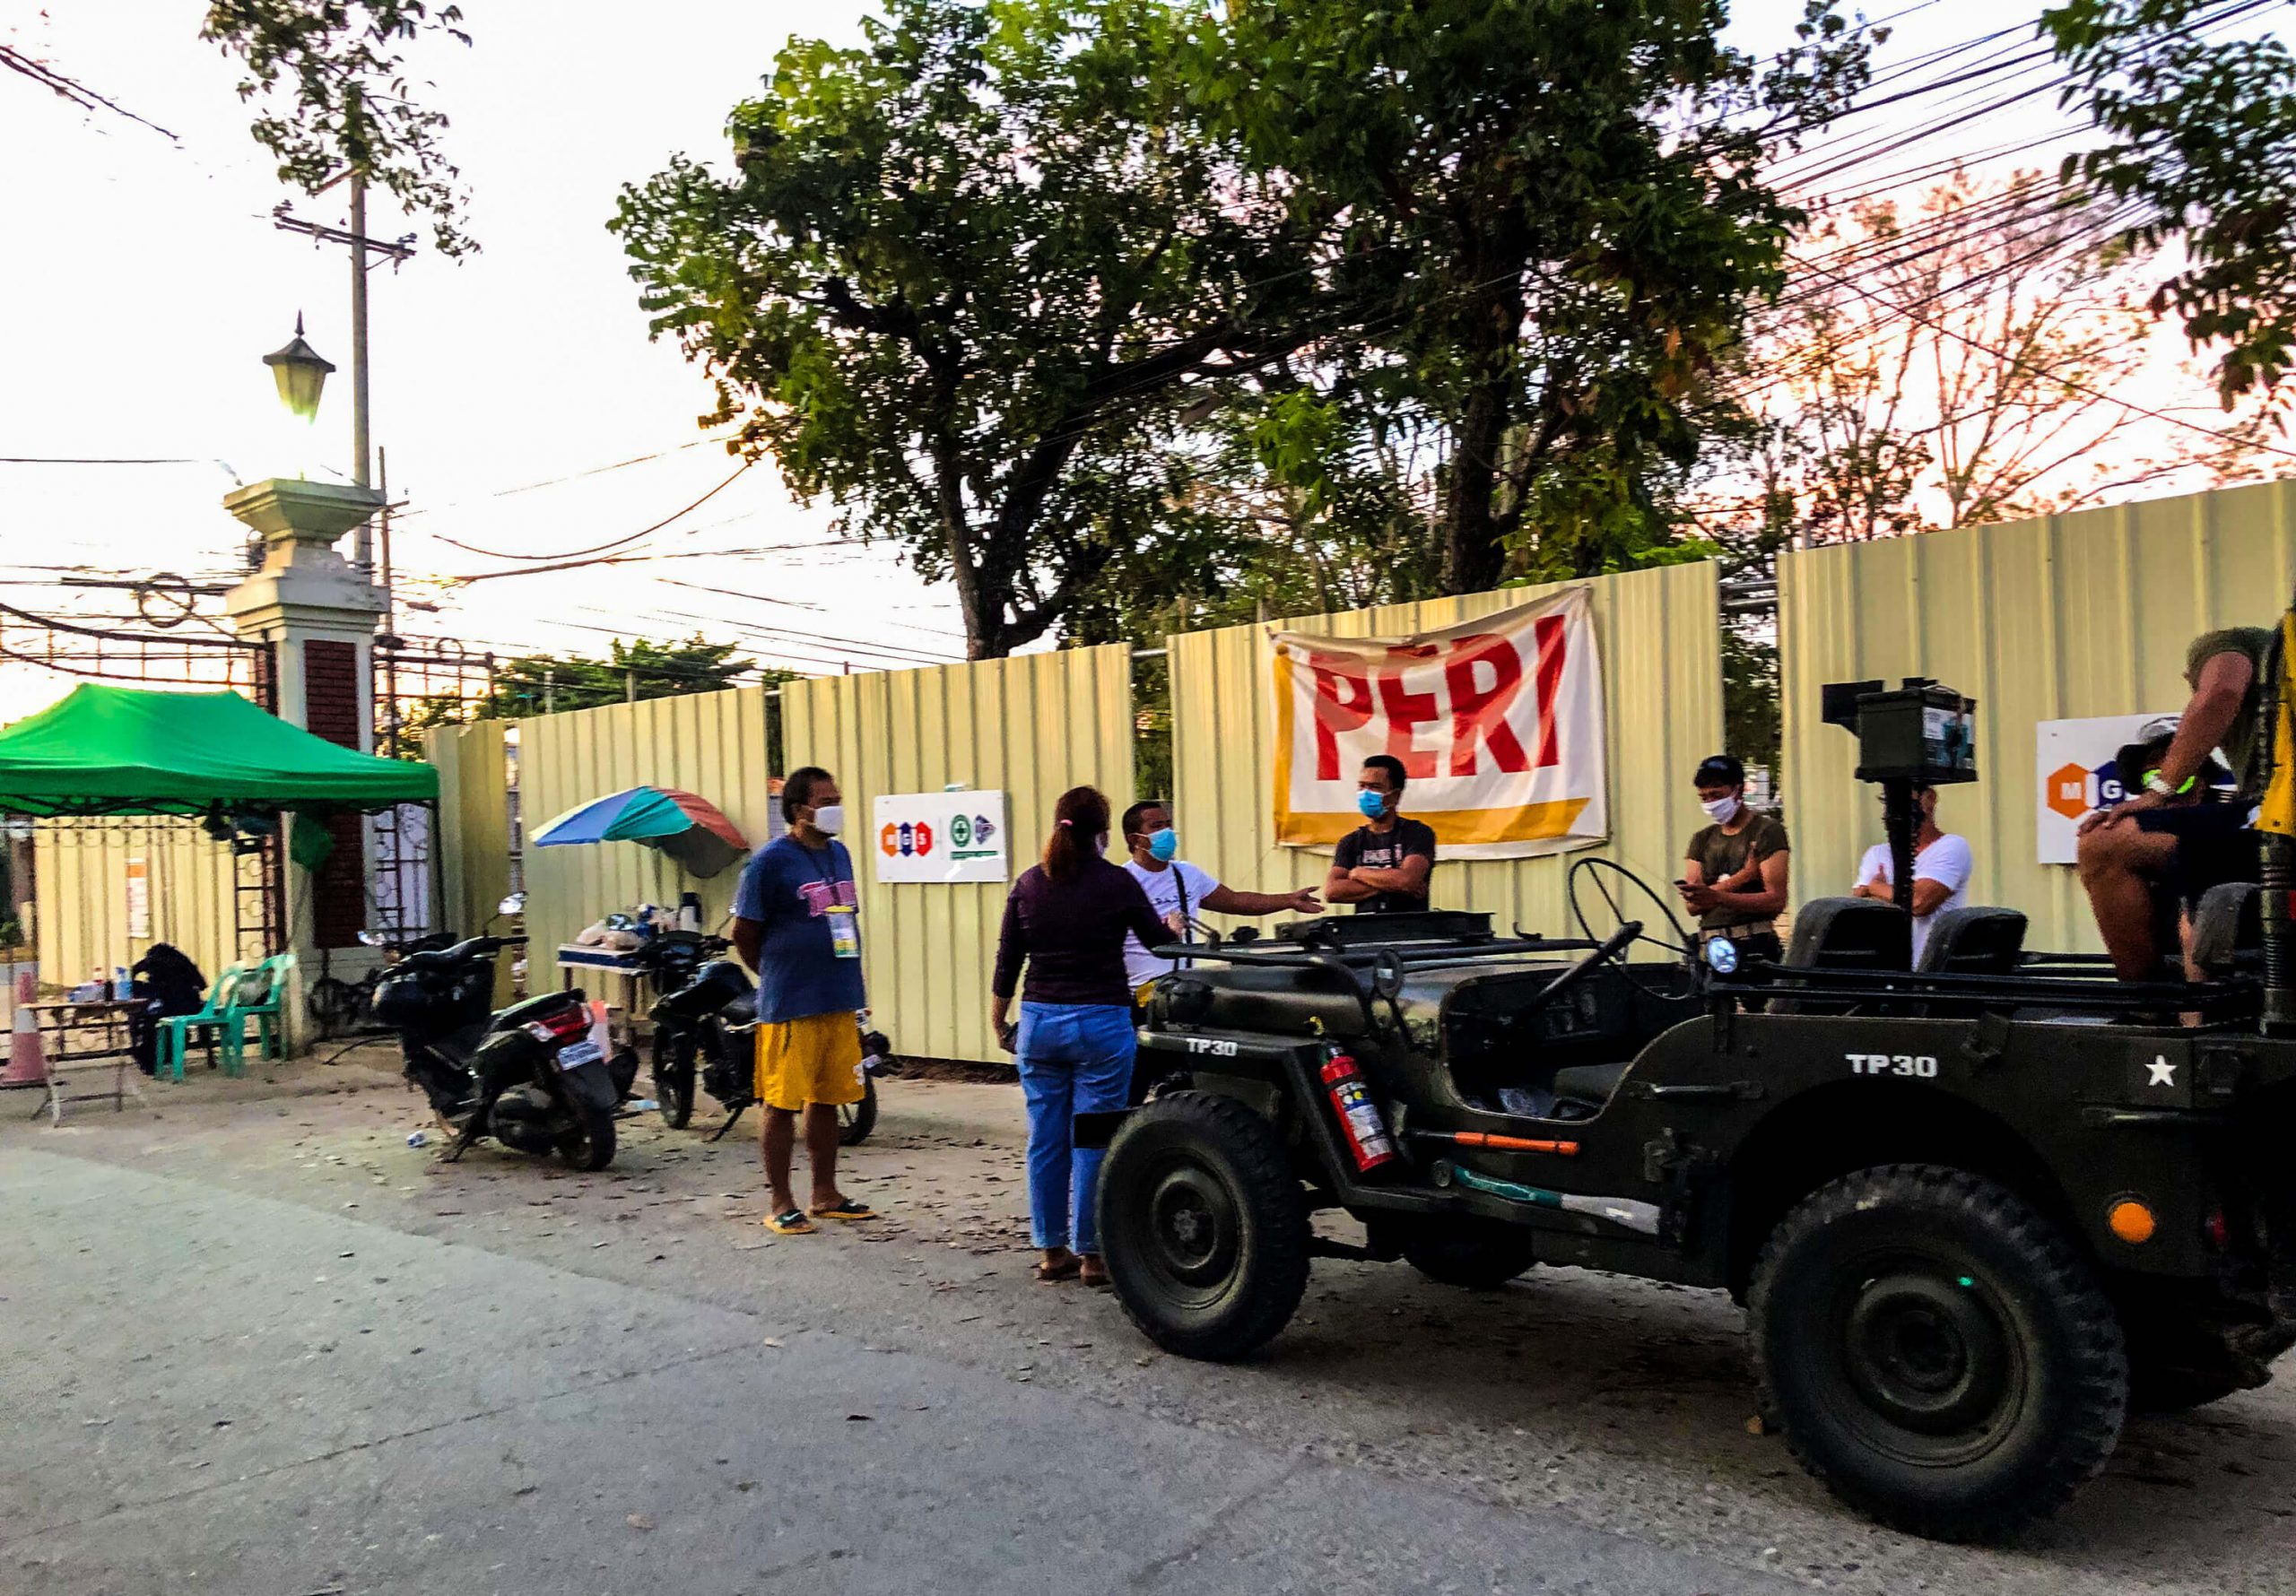 A subdivision official talks to a barangay official and a soldier during an argument at the gate of Camella Homes in Pajac, Lapu-Lapu City. The argument was over the decision to let through a car that was reported to be carrying "someone from Barrio Luz." At this time, Barrio Luz in Cebu City was put on strict lockdown because of soaring COVID-19 cases.
